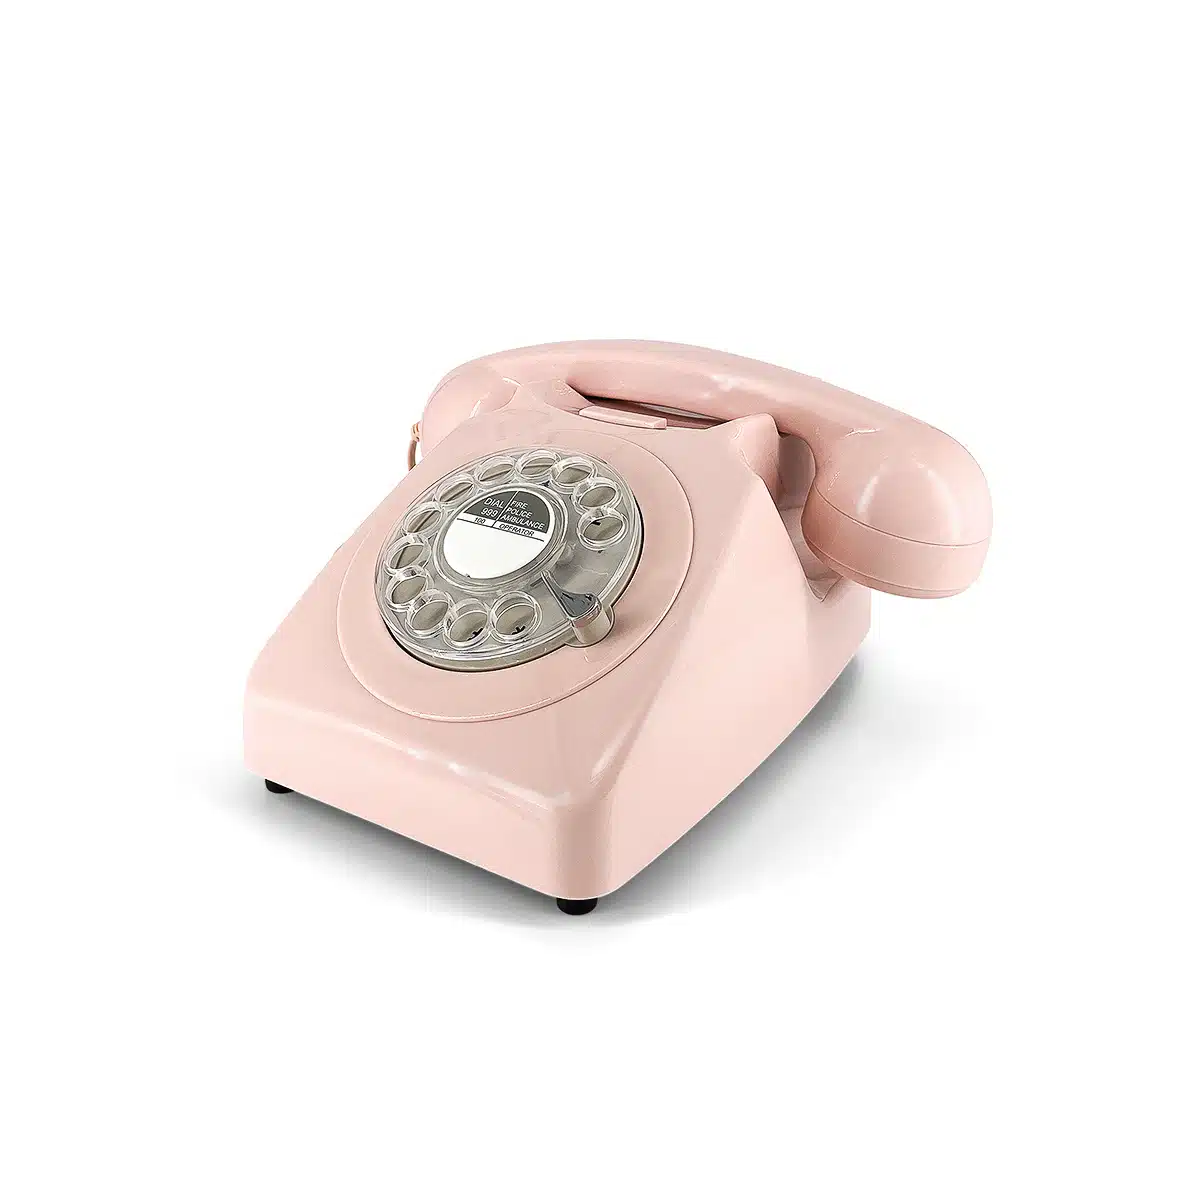 The Mod Pink Rotary Phone Audio Guest Book